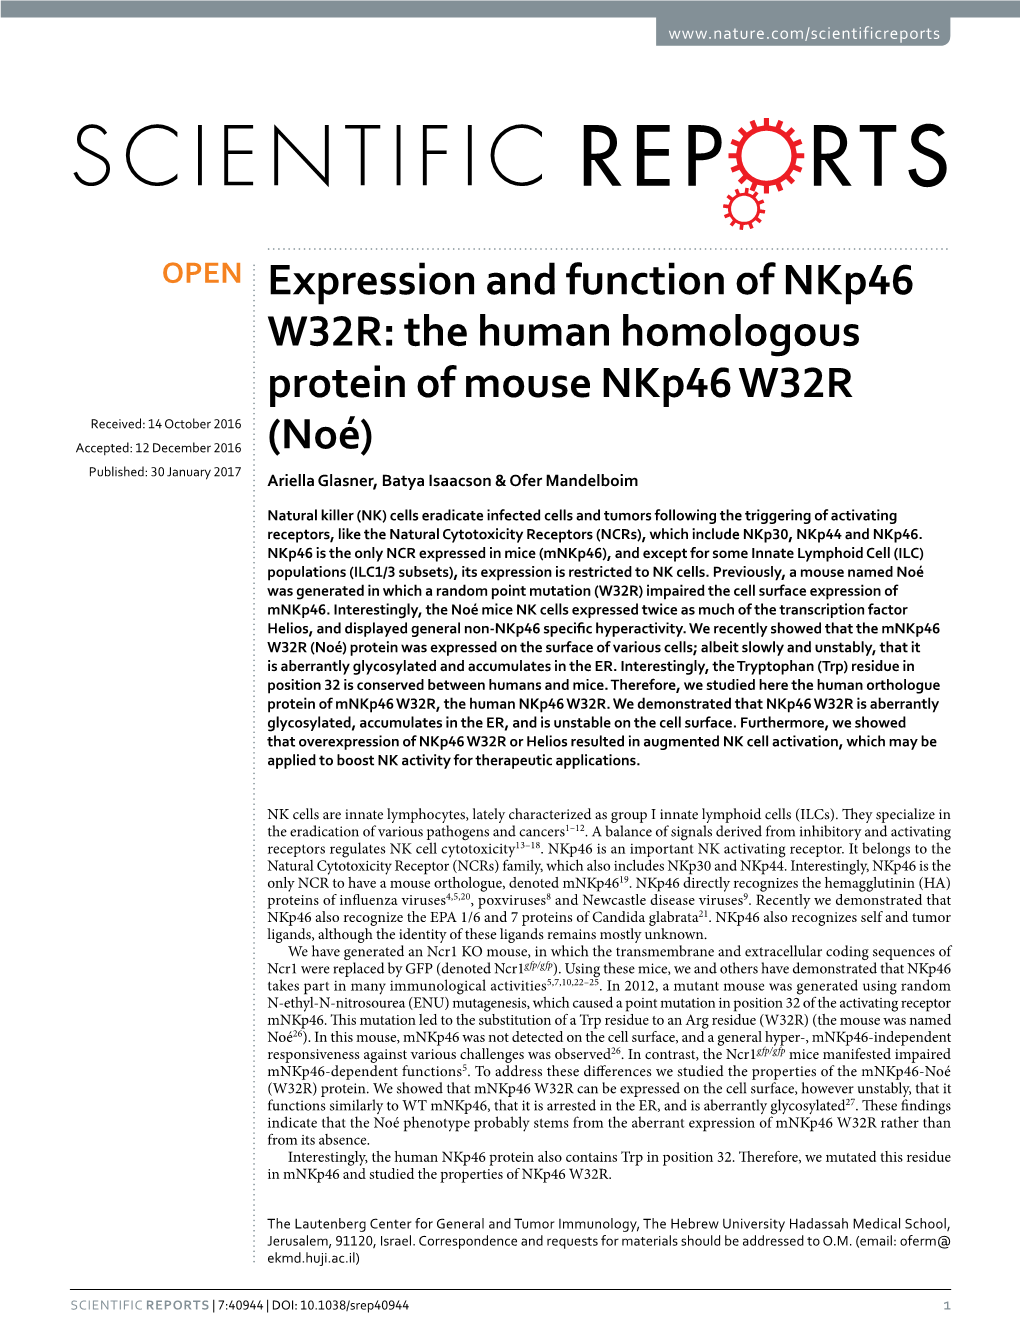 Expression and Function of Nkp46 W32R